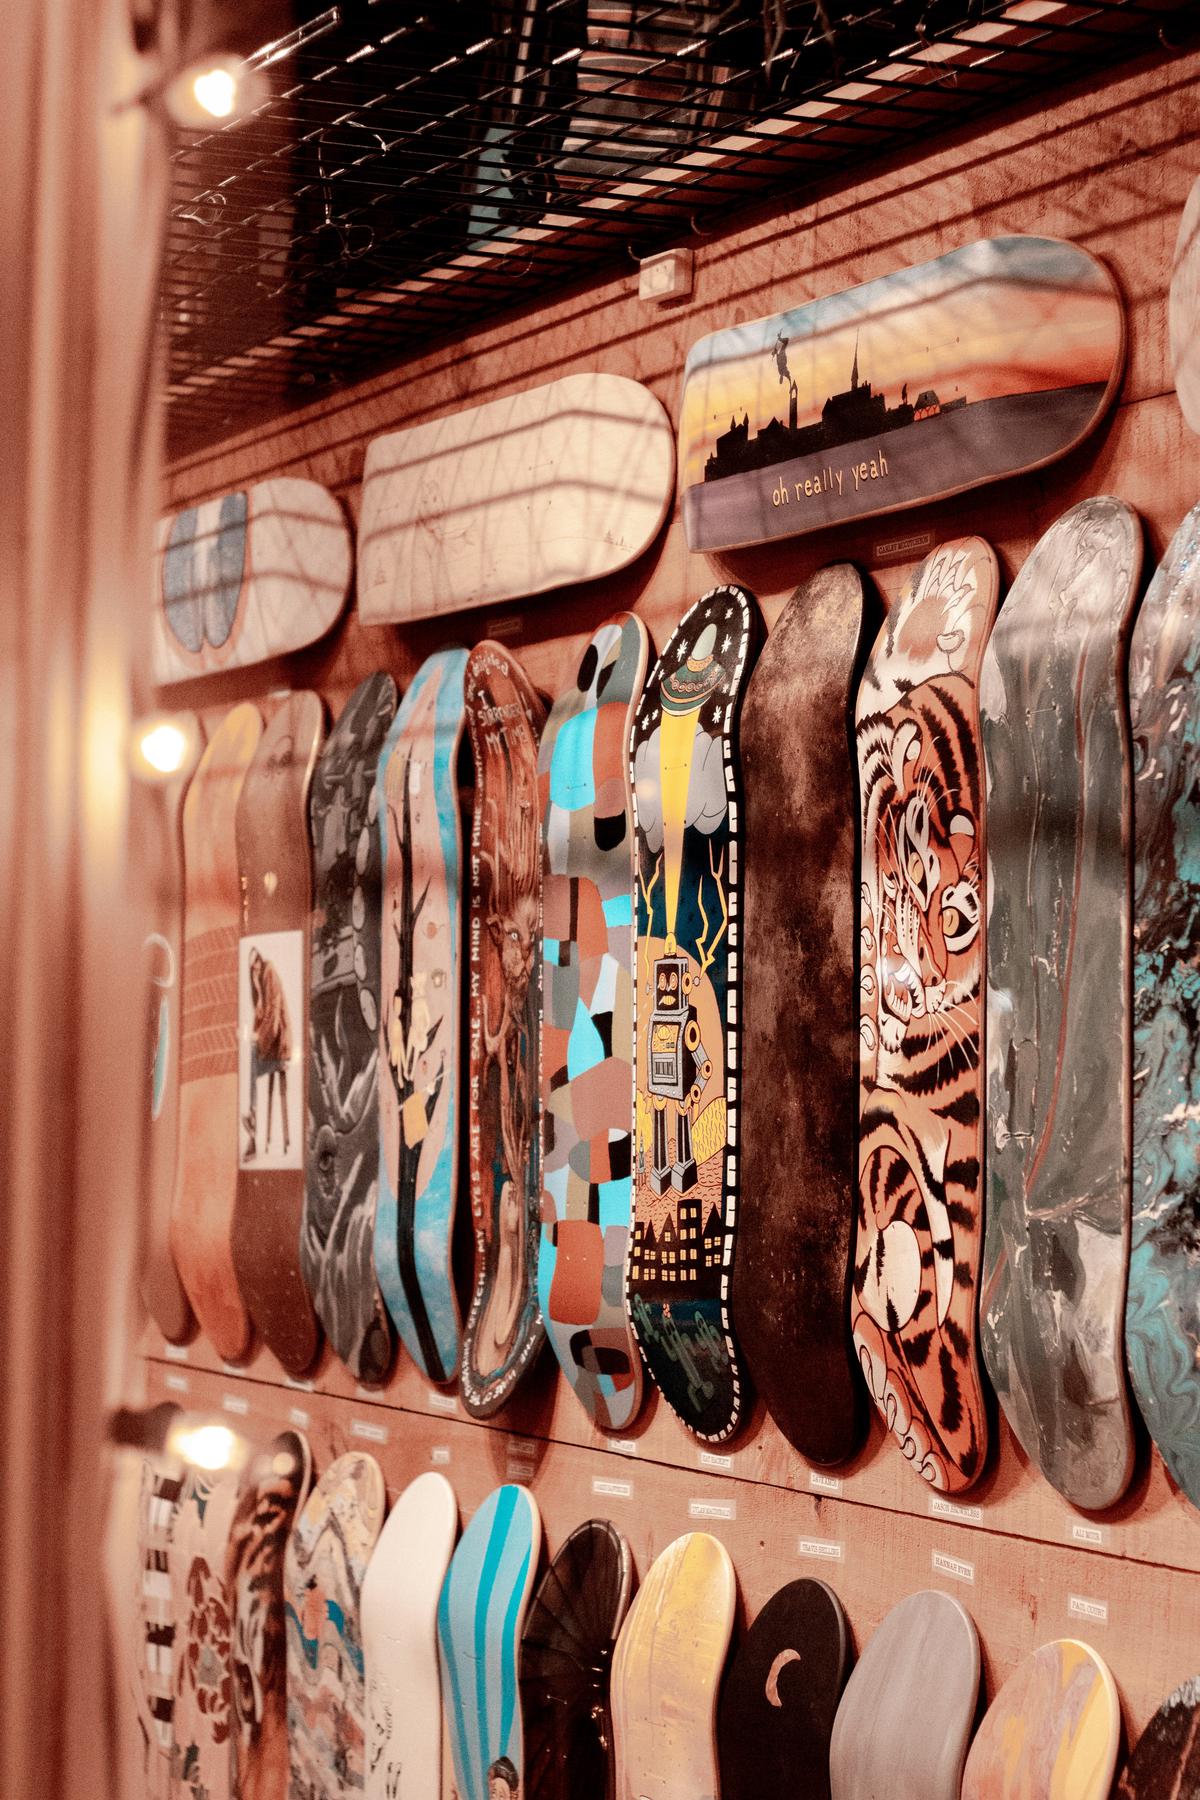 A skateboard with high-quality components, showcasing durability, performance, and reliability for an optimal riding experience.